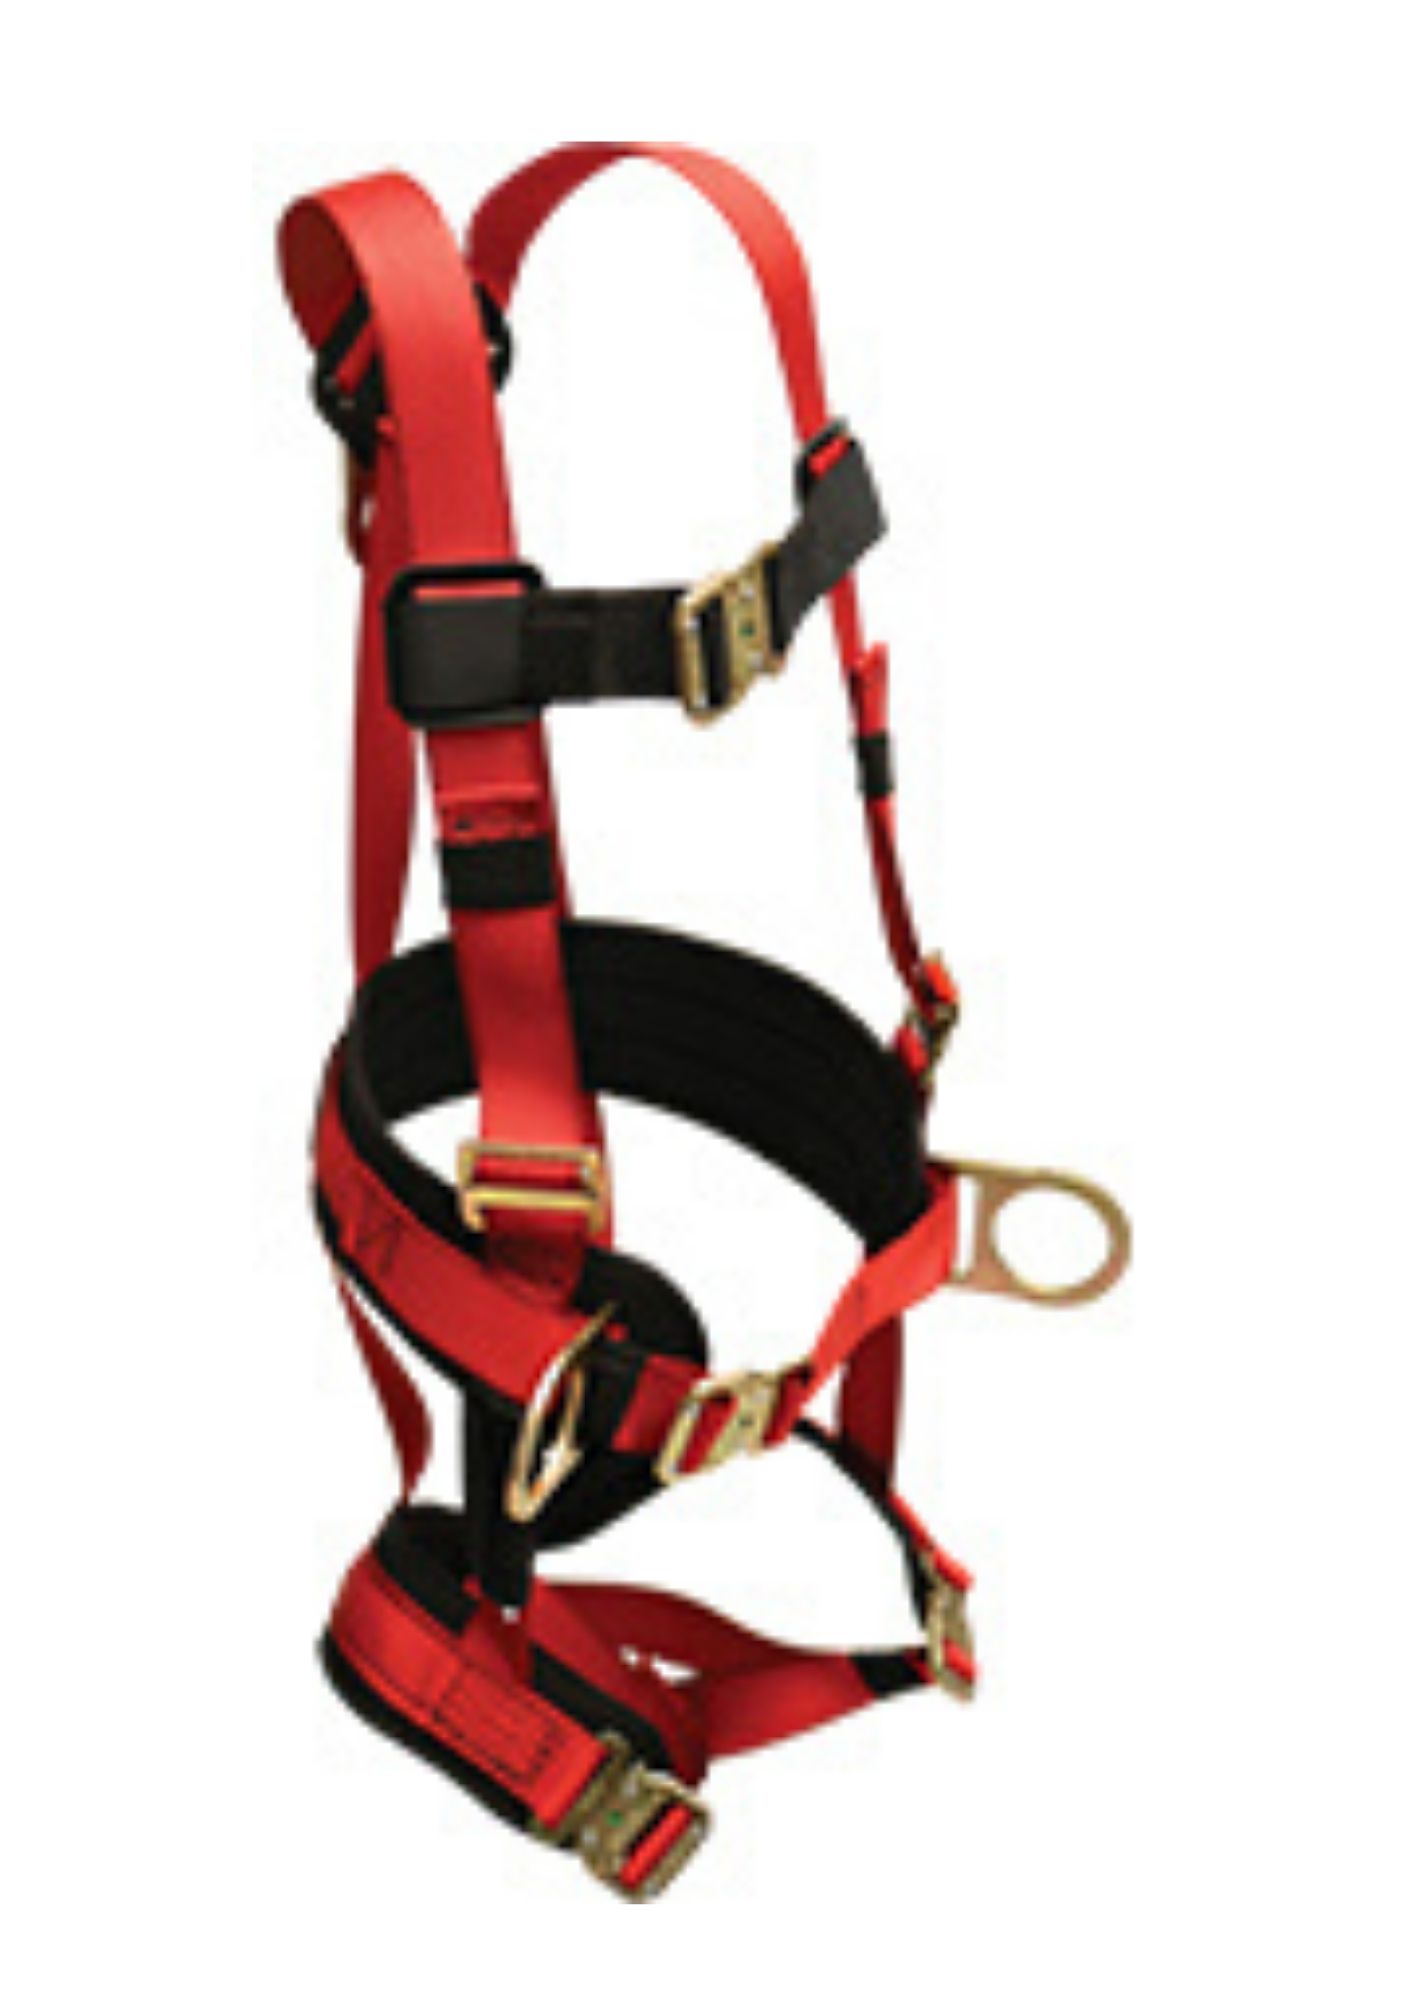 French Creek 872 Series Women's Full Body Harness from Columbia Safety